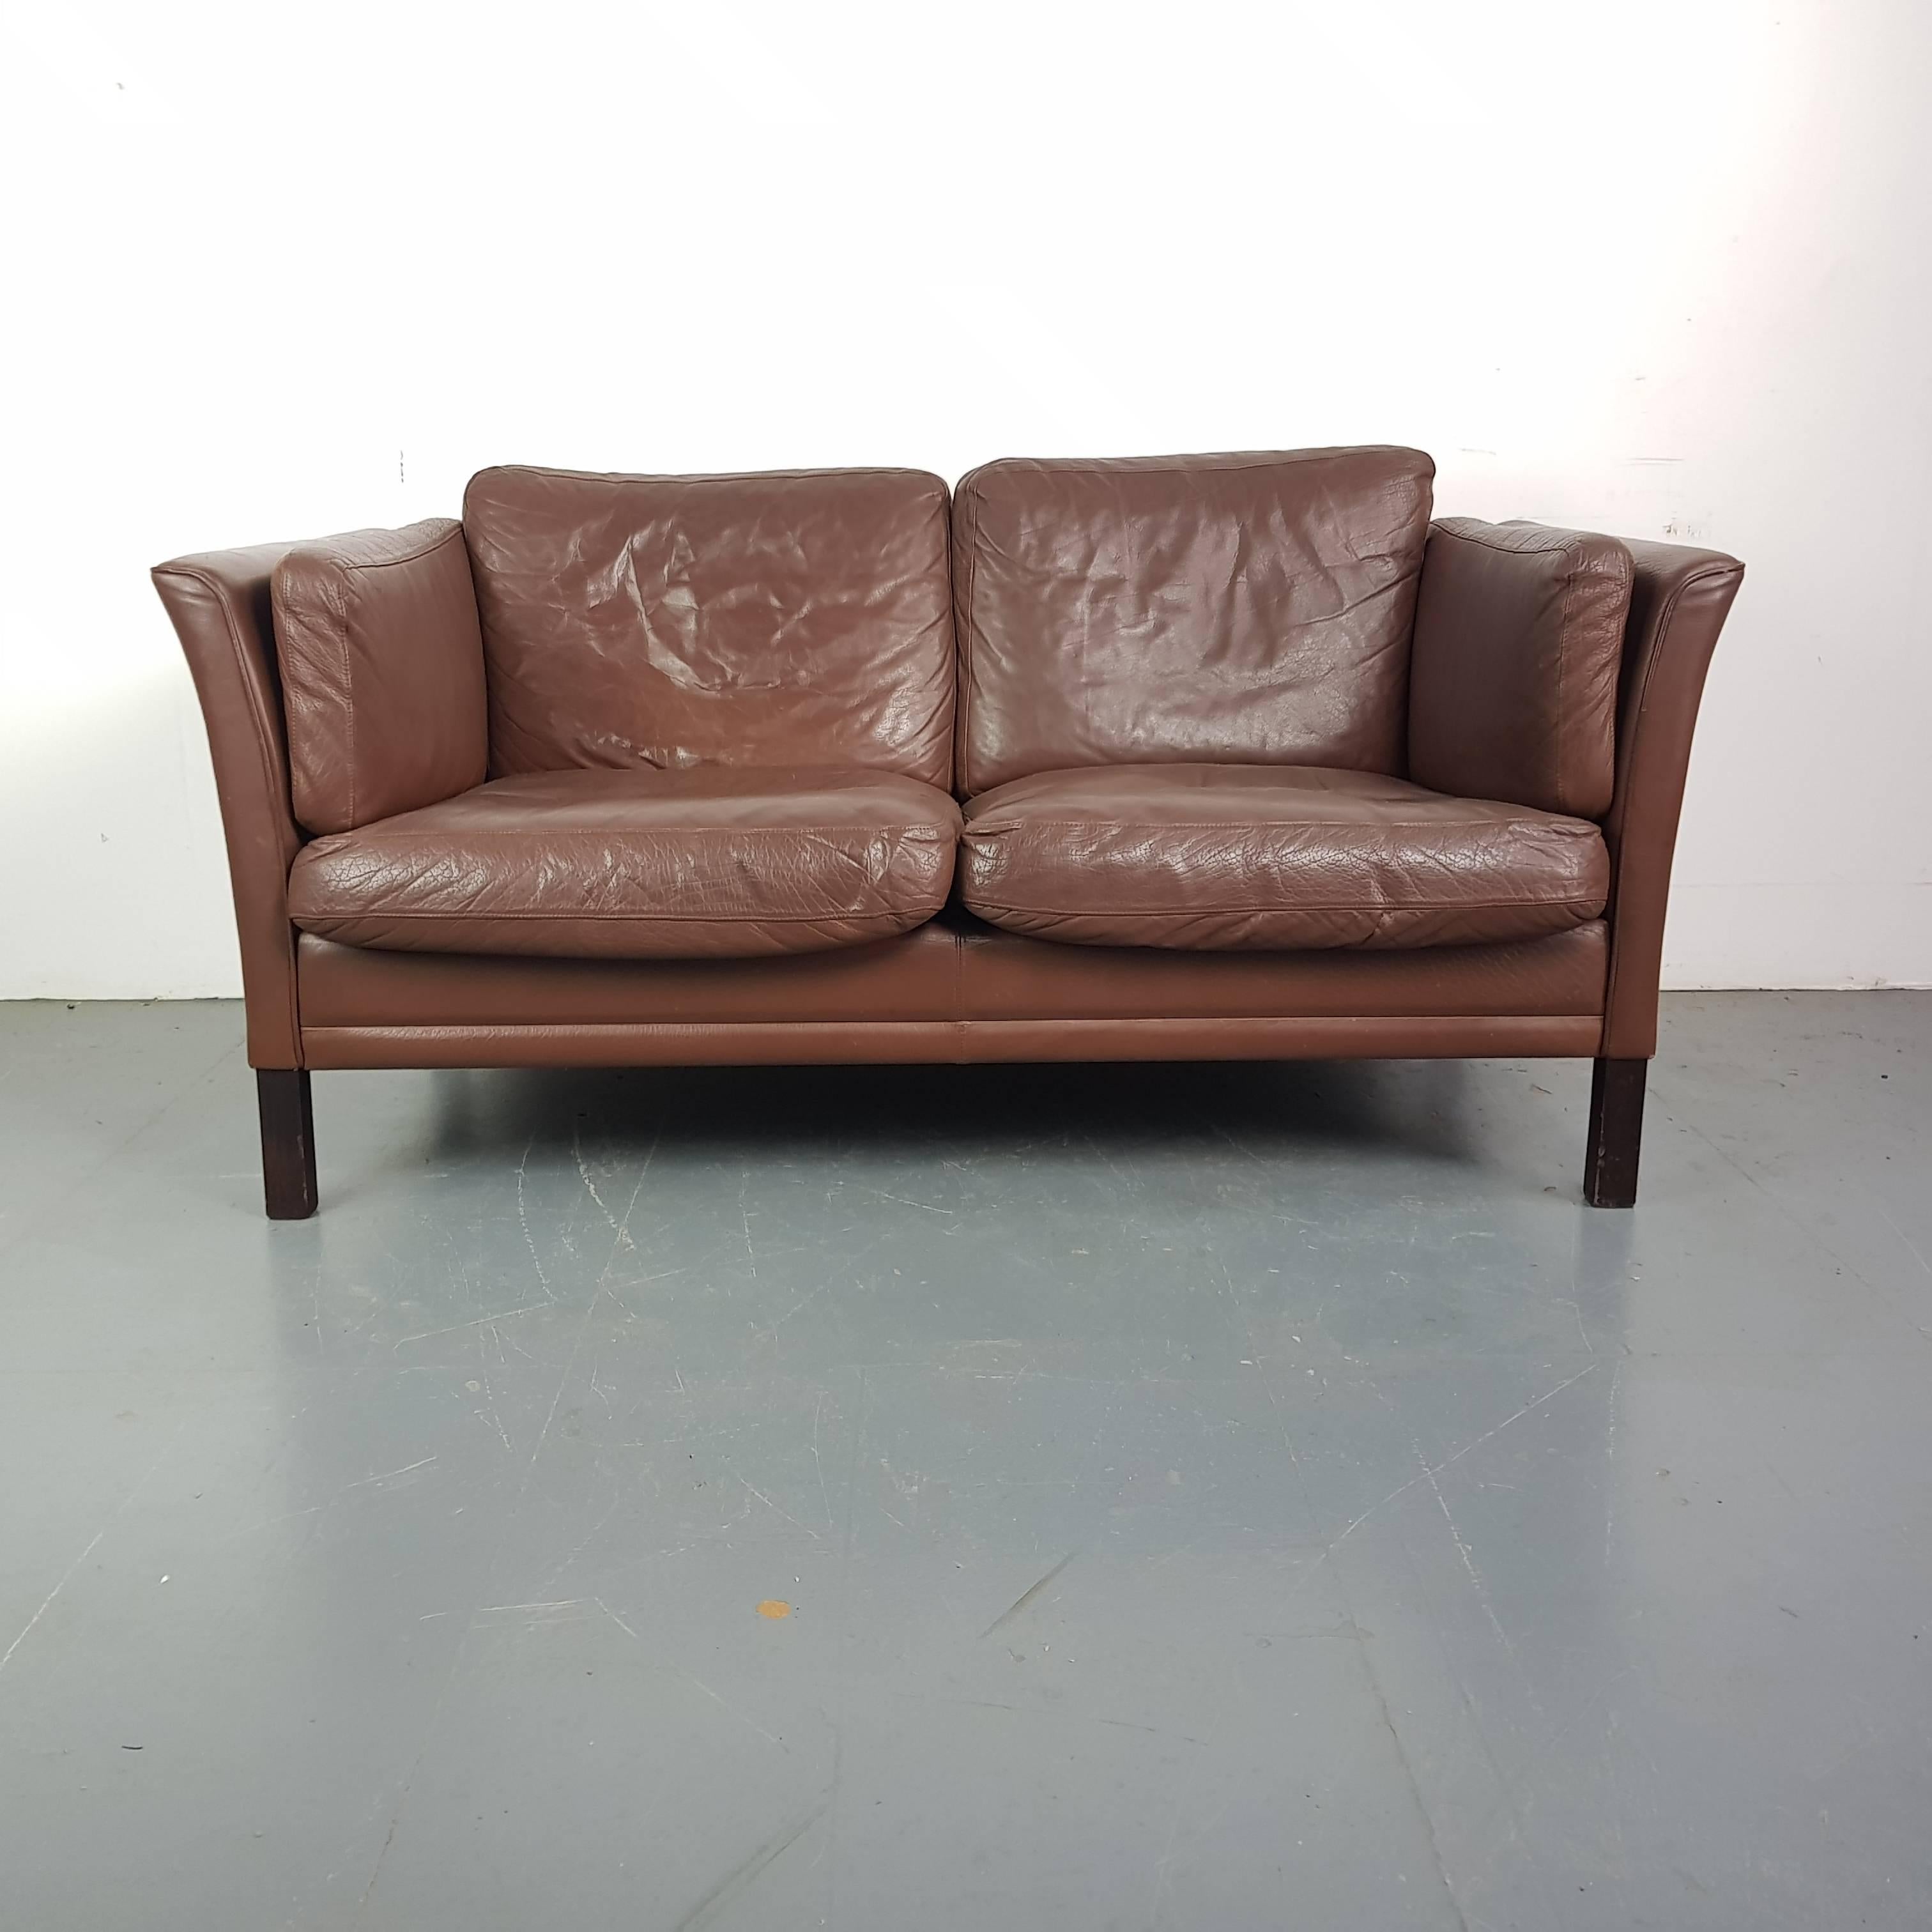 Chestnut brown leather Mogensen style 1970s two-seat sofa. 

Detachable down-filled seat cushions. Wooden legs.

Approximate dimensions:

Width 153cm

Depth 80cm

Height 76cm.

In good vintage condition; some wear and tear, a few bumps